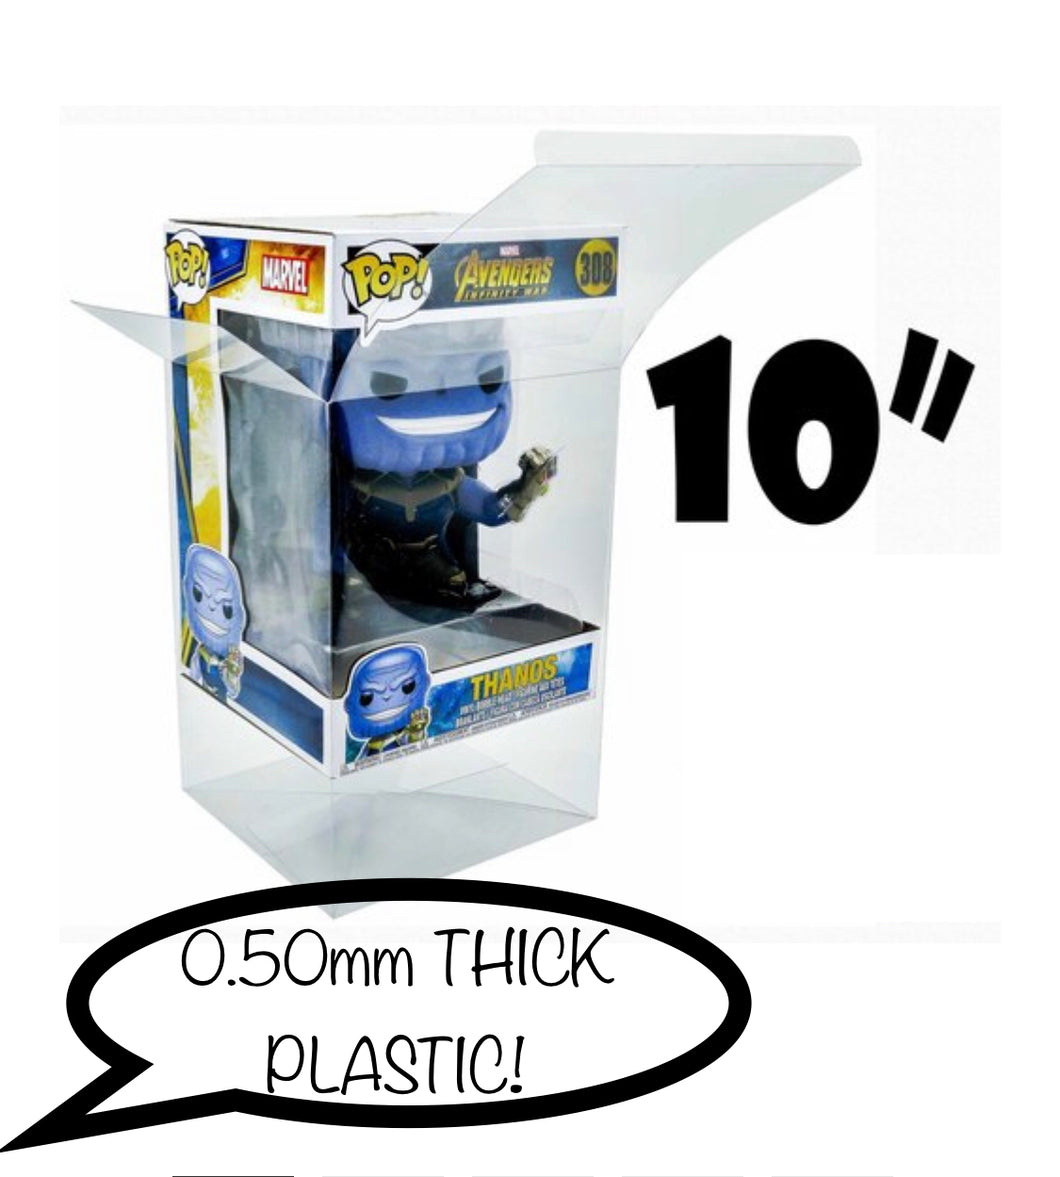 10 Inch Funko POP! Box Protector made with 0.50mm thick PET Acid-Free Plastic